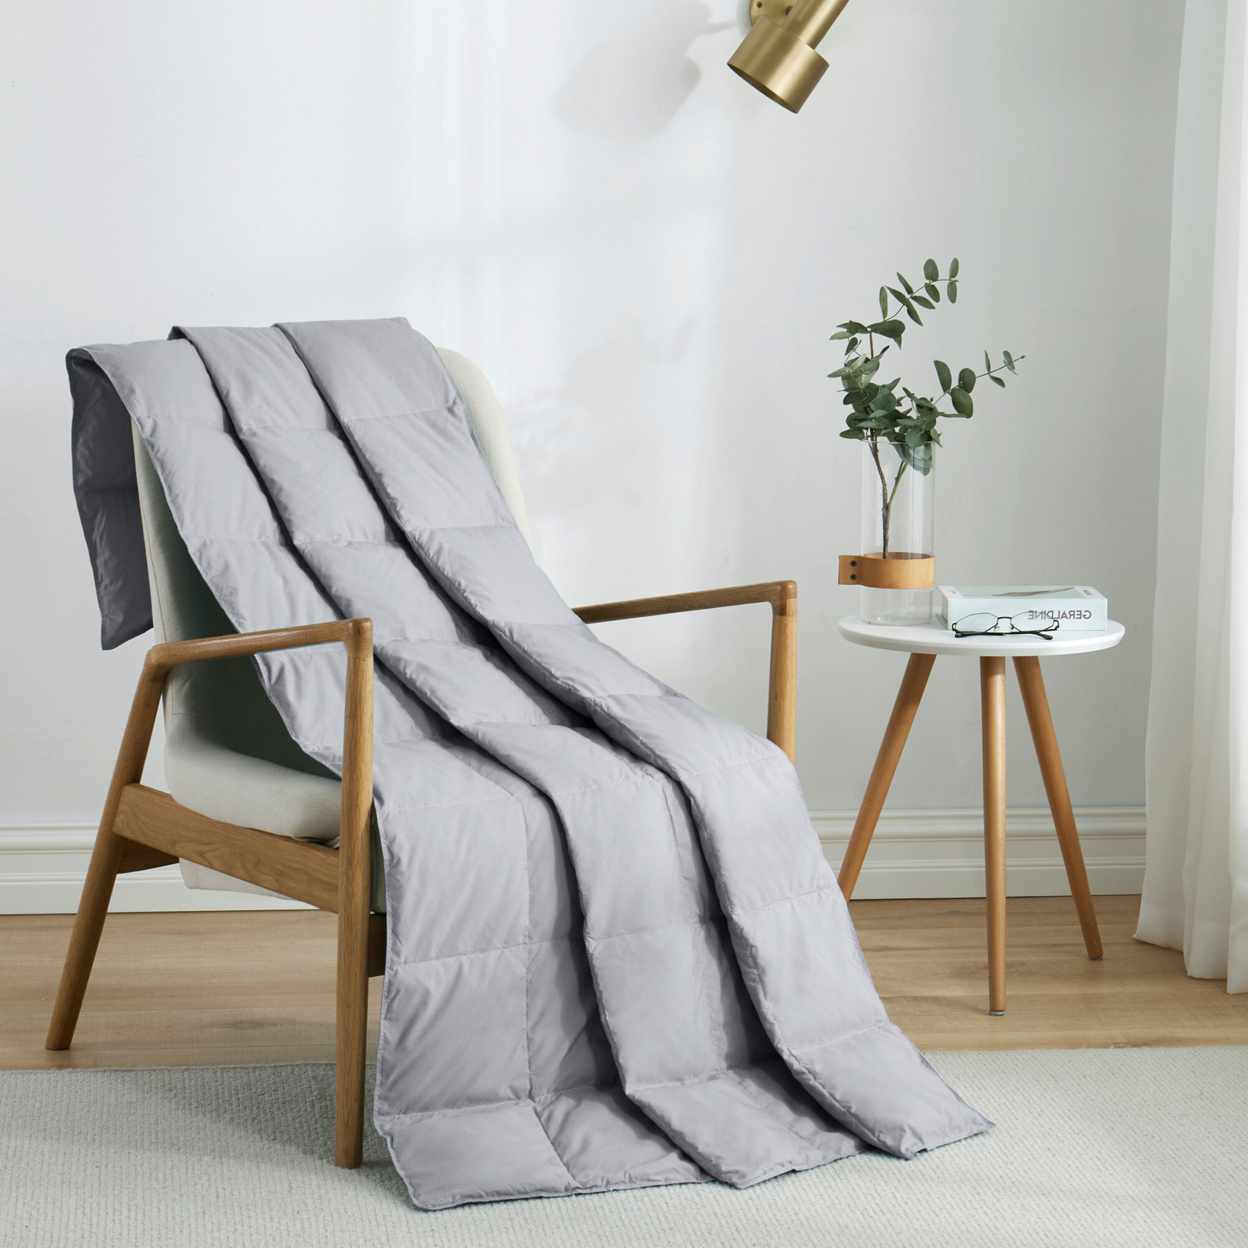 Natural Down Blanket Filled With UltraFeather And Down, Throw Blanket (50 X 70) Sewn Through Box Design - Grey